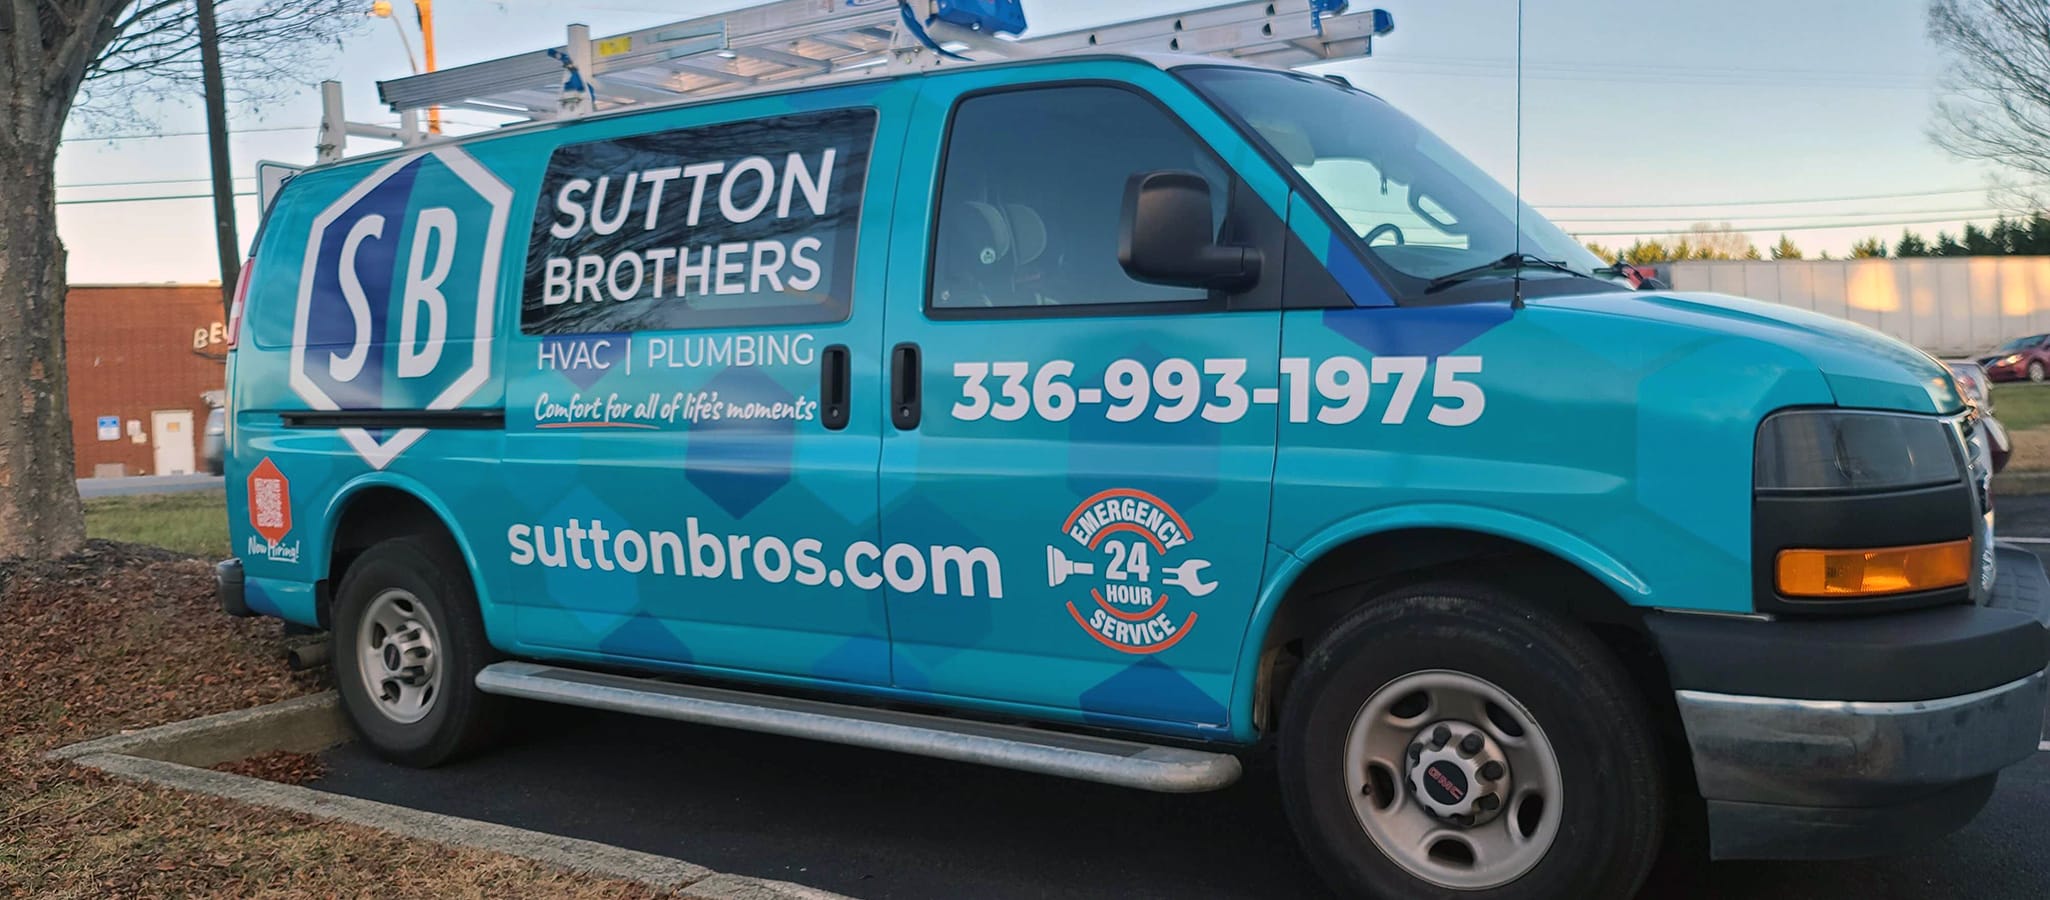 A Sutton Brothers GMC Savana truck branded with a teal hexagonal pattern and a ladder rack on the roof parked outside.